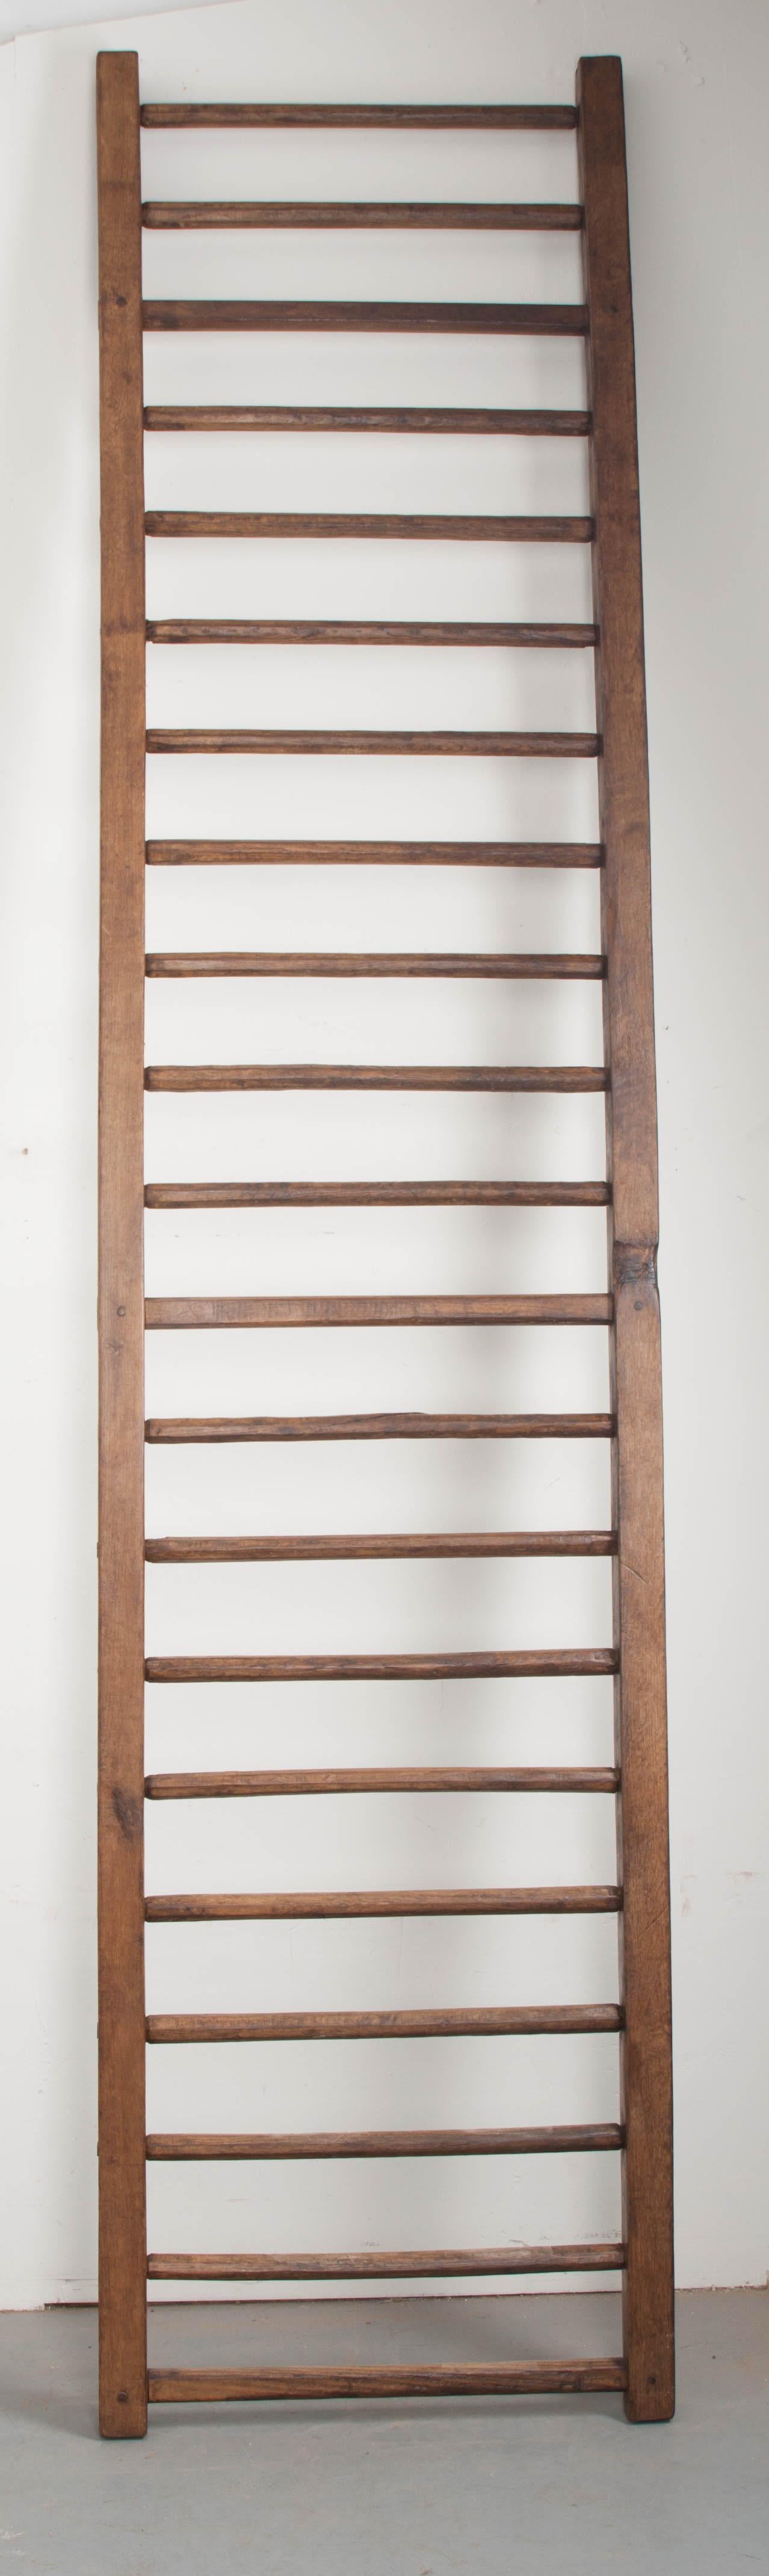 An impressive antique ladder, made entirely of oak, from 19th century England. The long side rails extend skyward, making for a nearly 10 1/2' ladder! Each of the 21 rungs have all been individually hand-carved, with no two looking exactly the same.